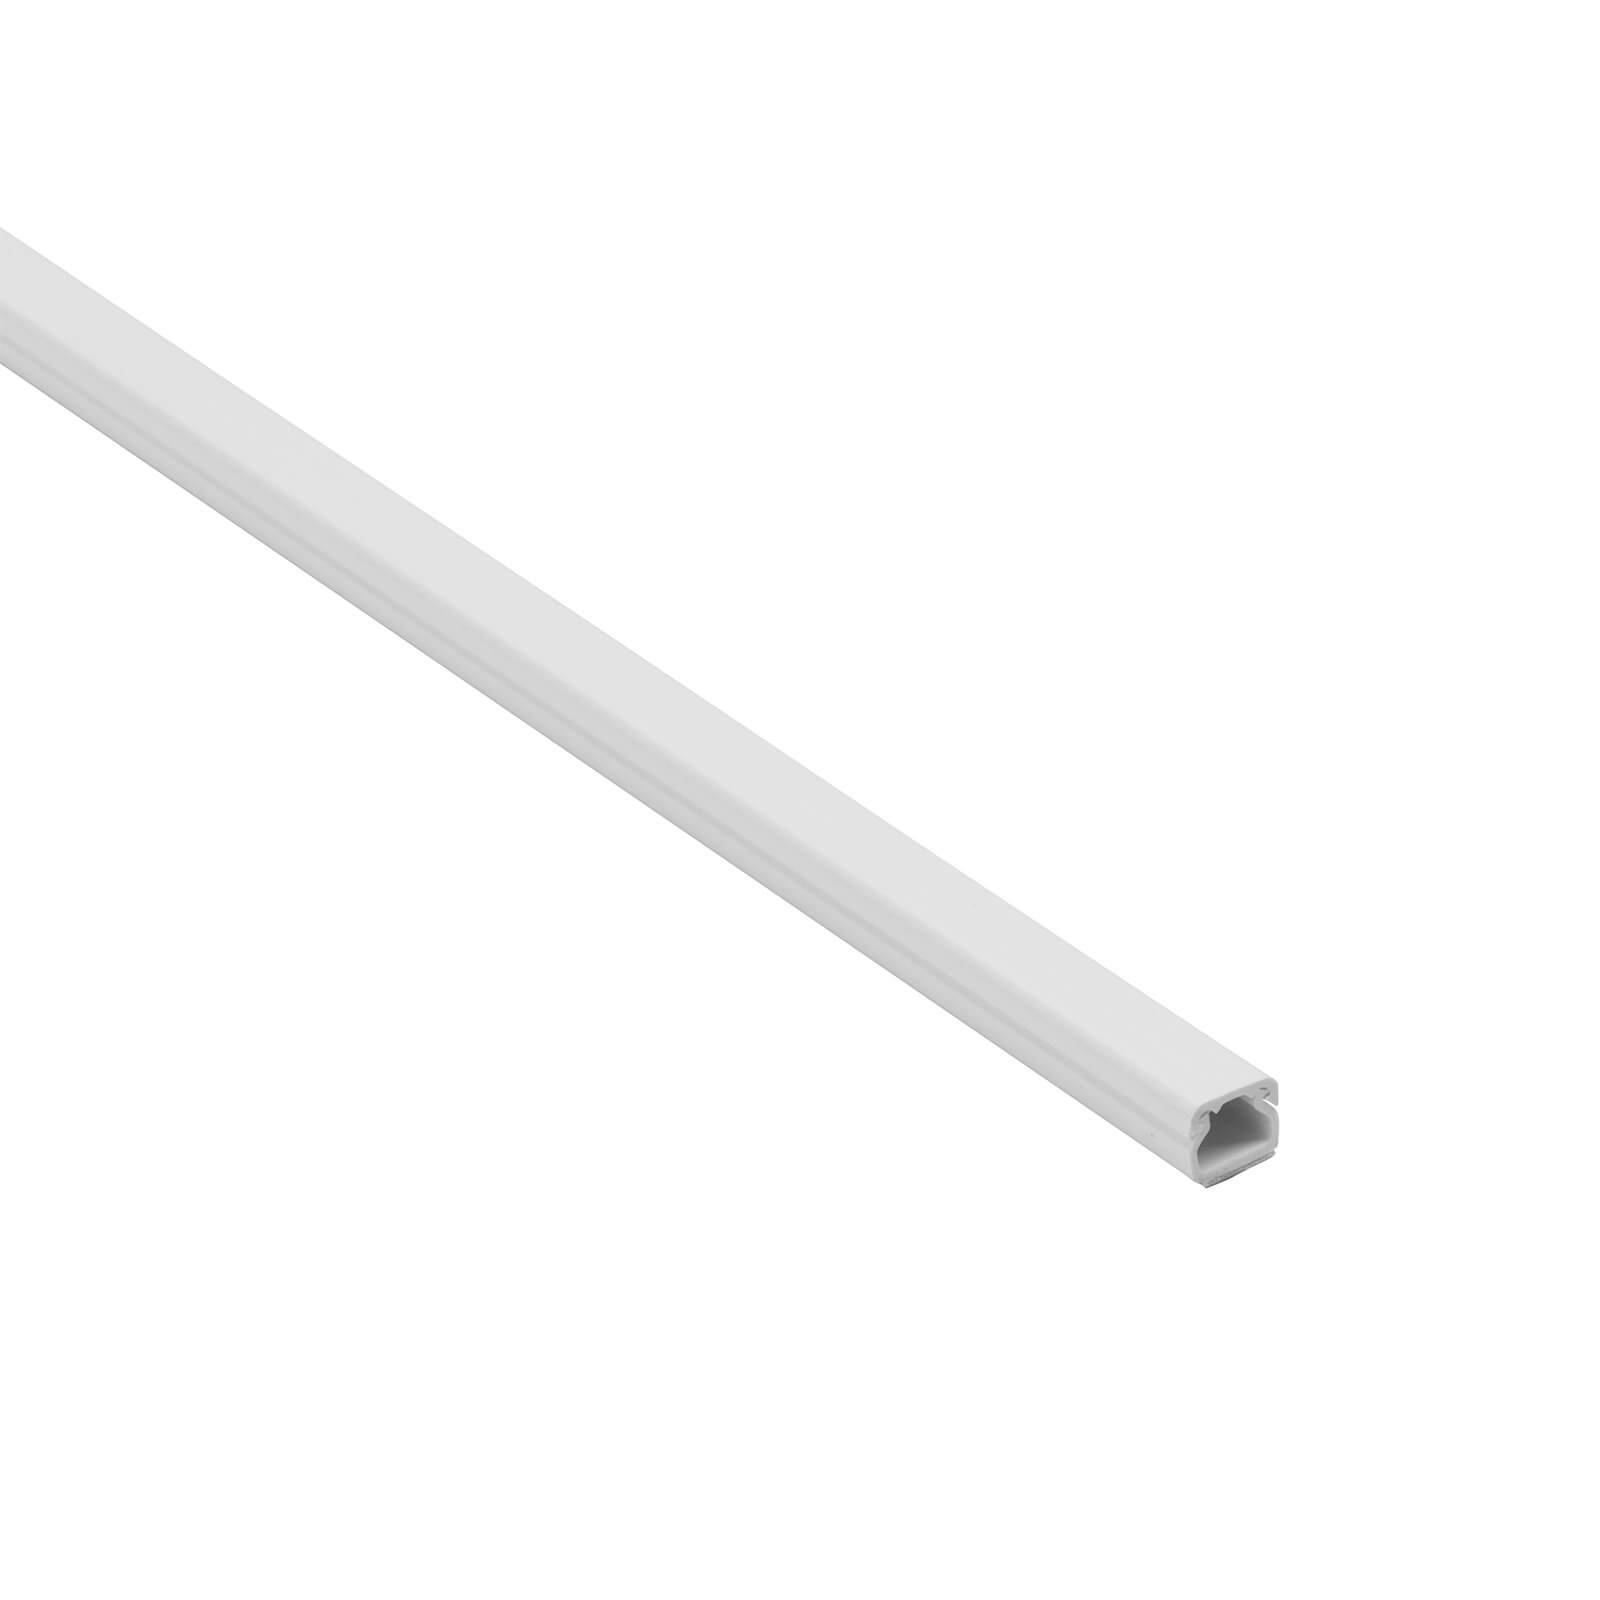 Photo of D-line Trunking - 10mm X 8mm X 2m Length - White